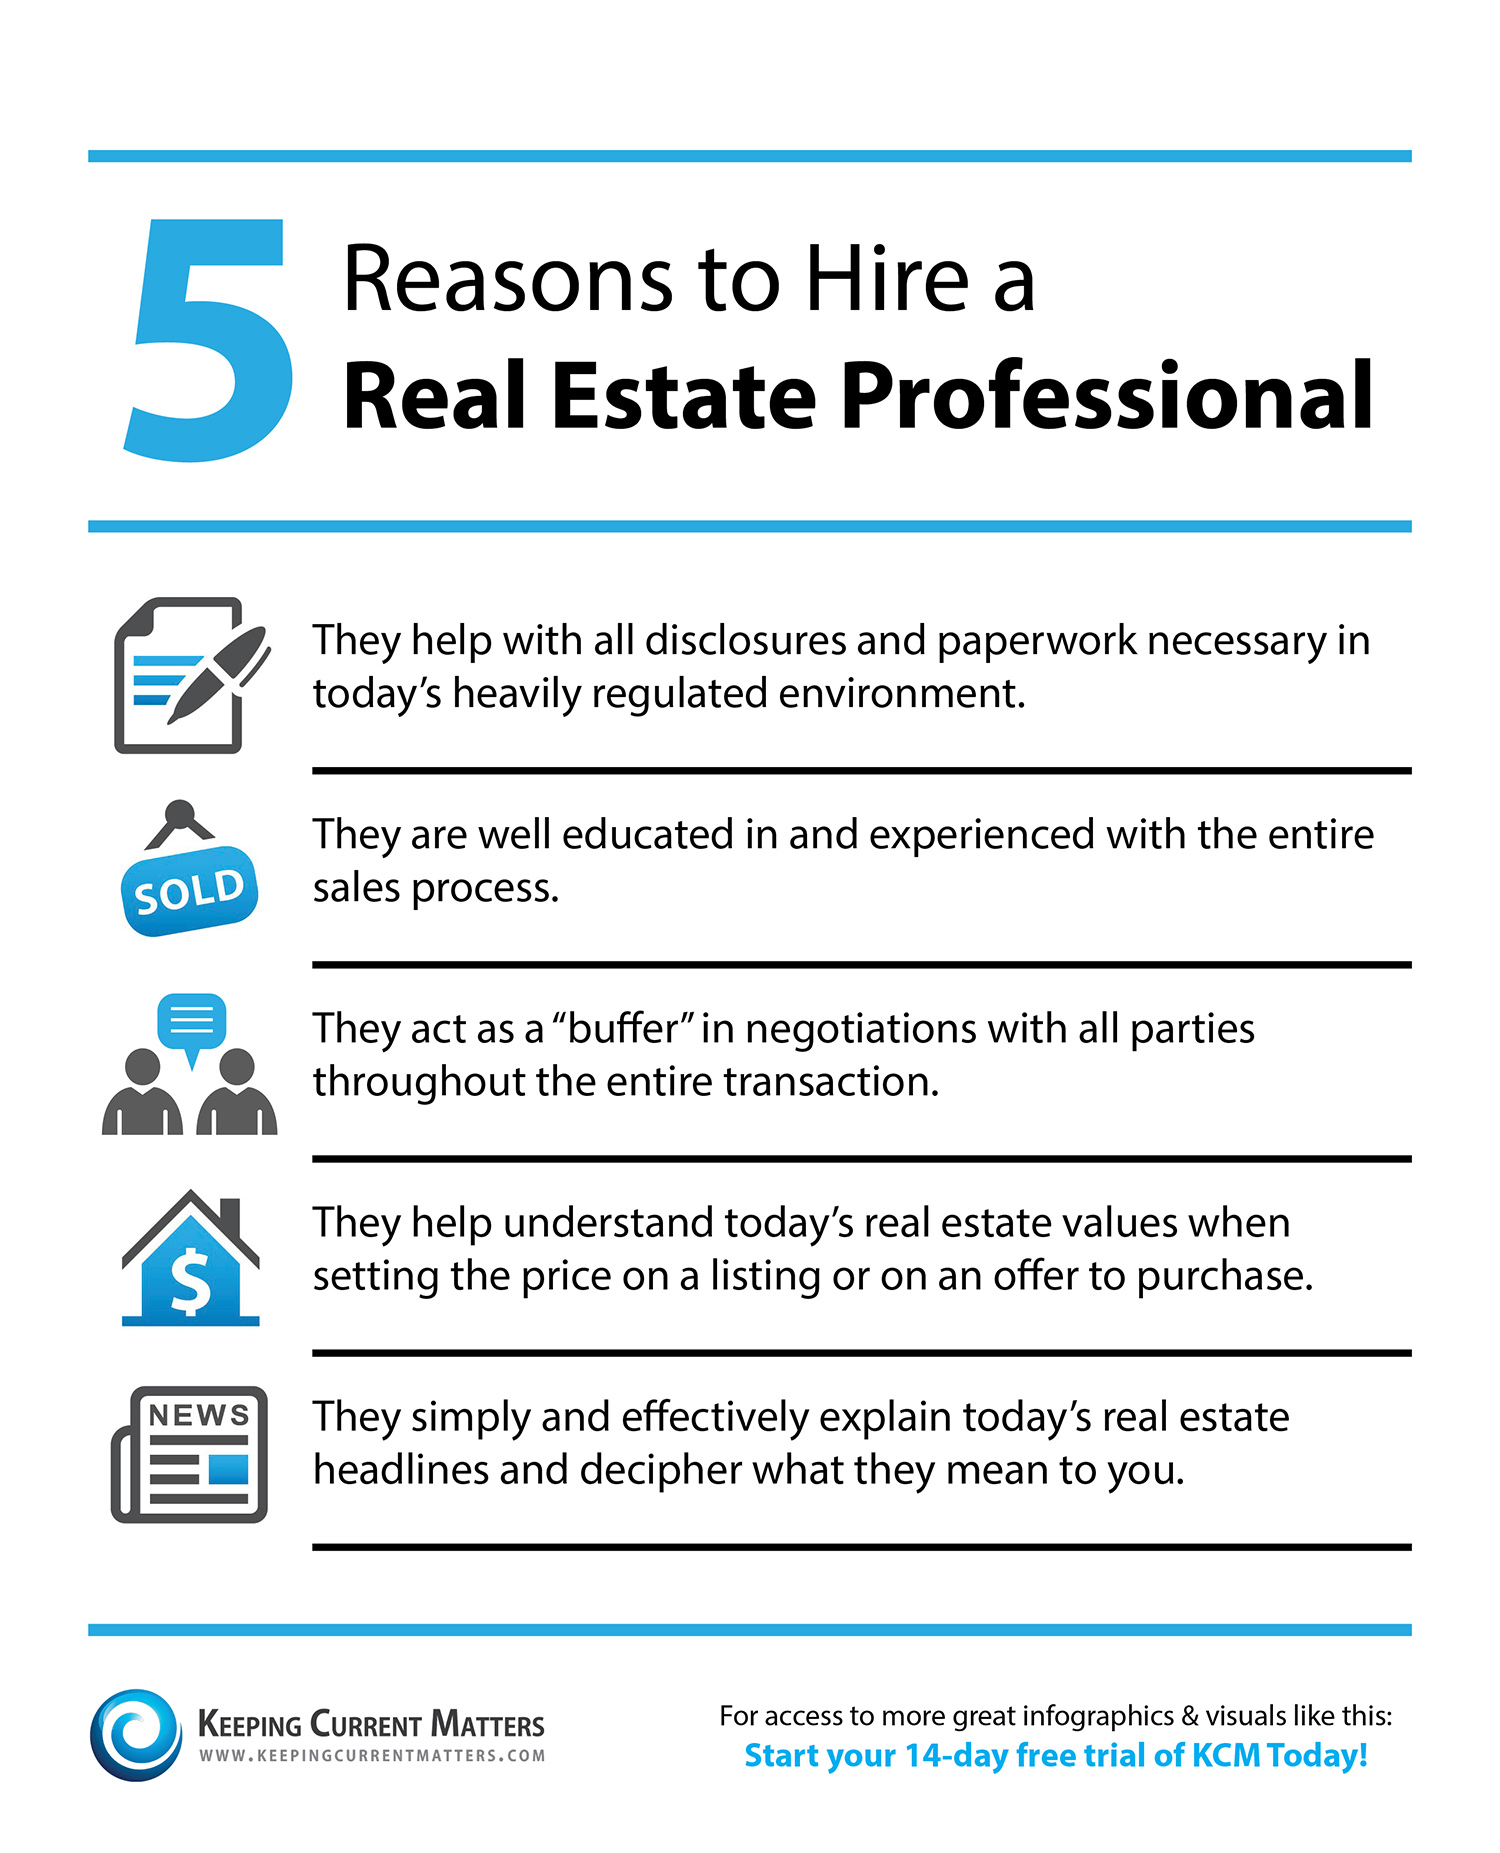 5 Reasons to Hire a Real Estate Professional | Keeping Current Matters